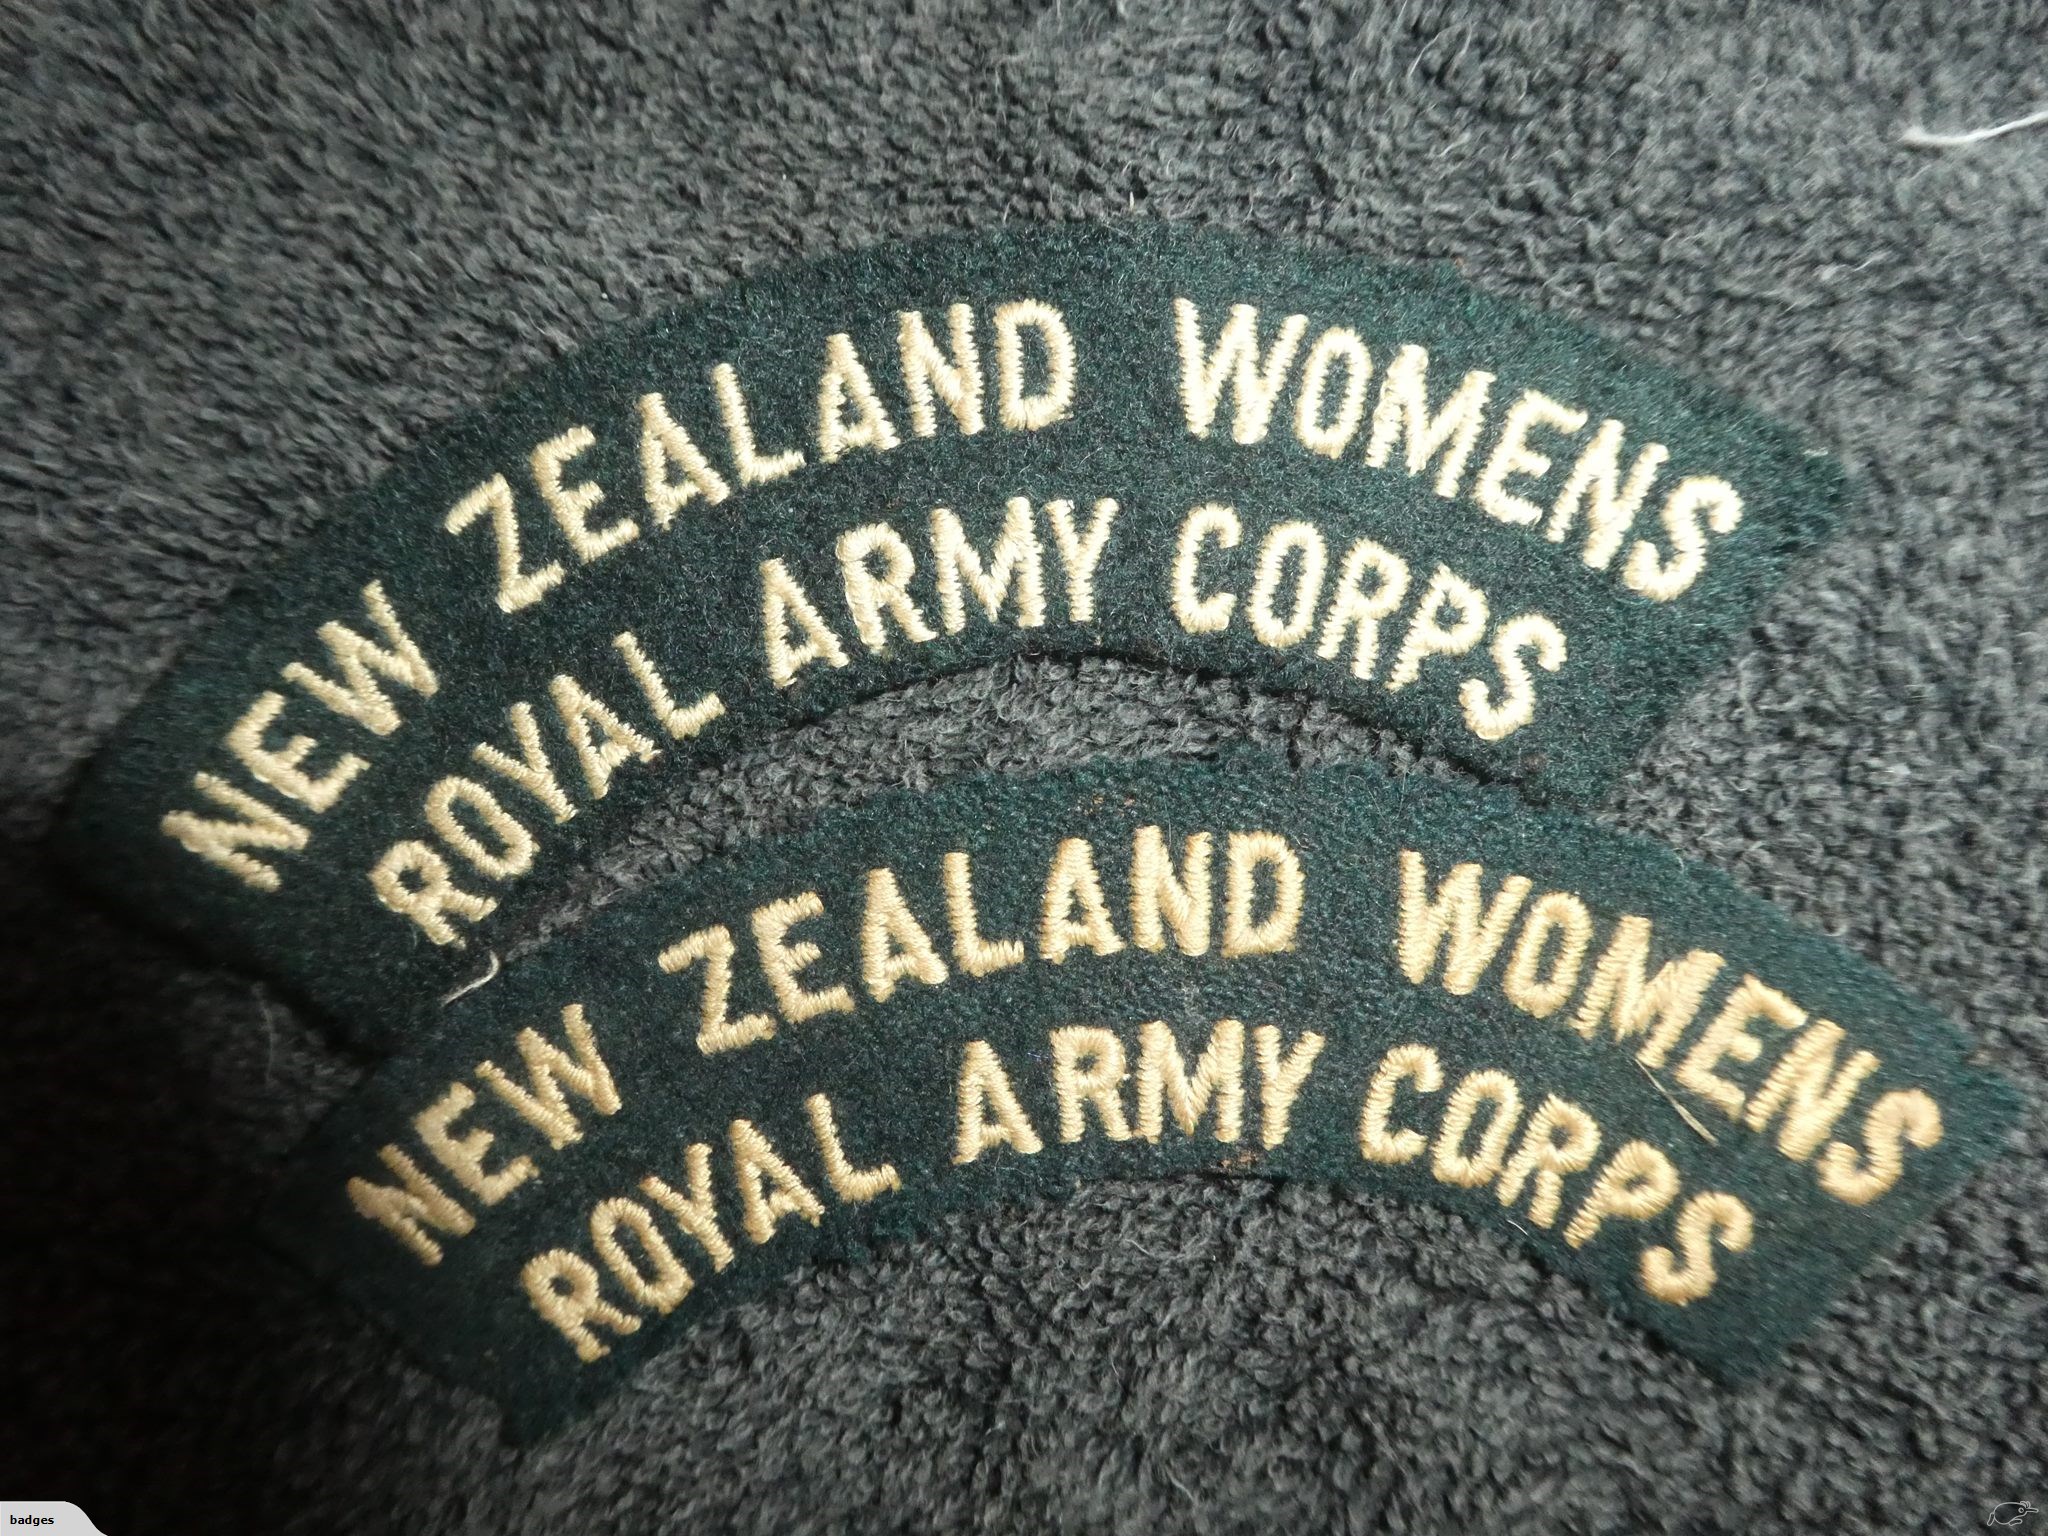 New Zealand Womens Royal Army Corps Shoulder Titles 1960s 1970s